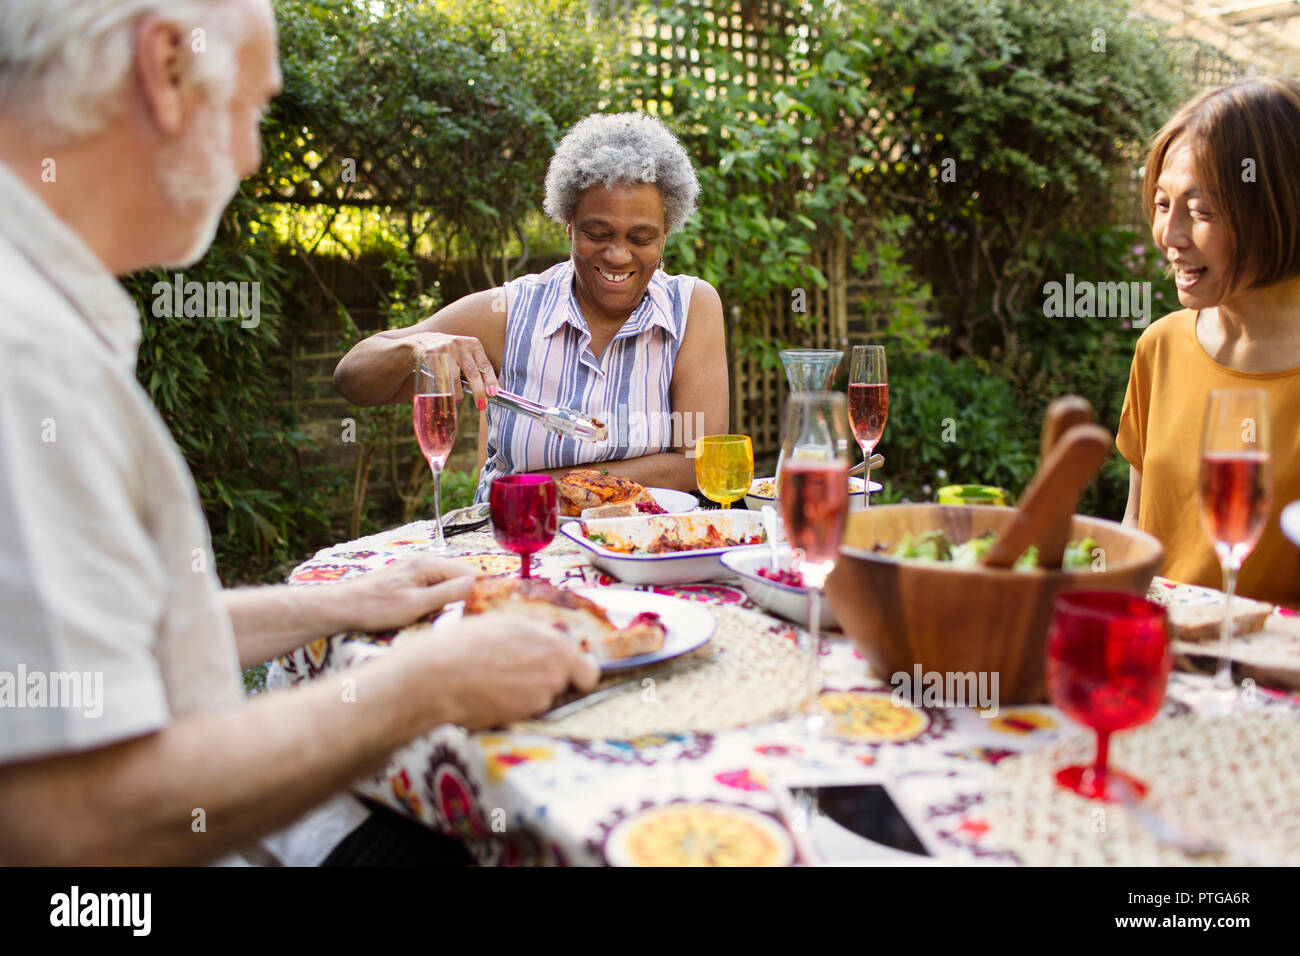 Senior friends enjoying lunch at patio table Stock Photo